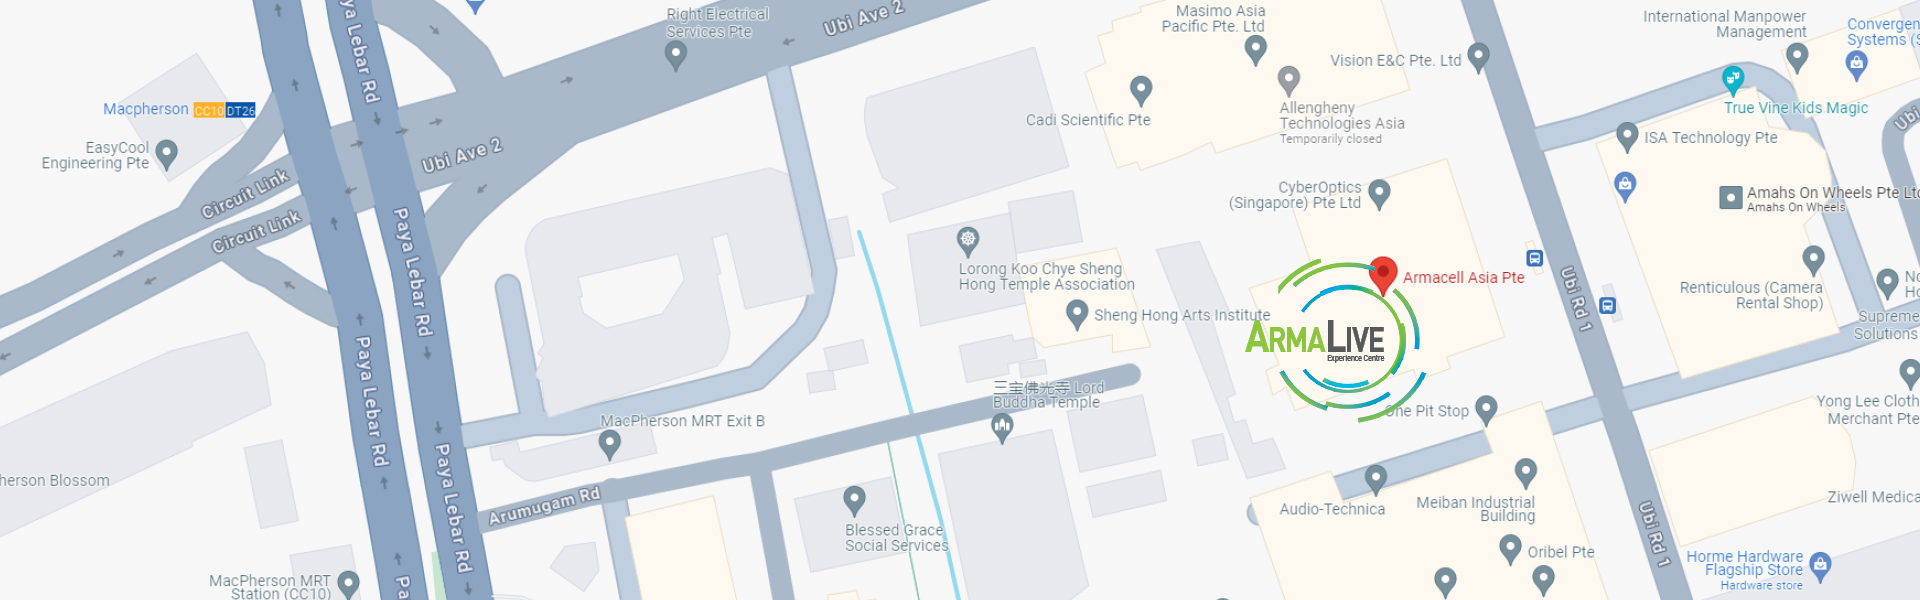 Map showing location of ArmaLive Experience Centre and Armacell in Singapore